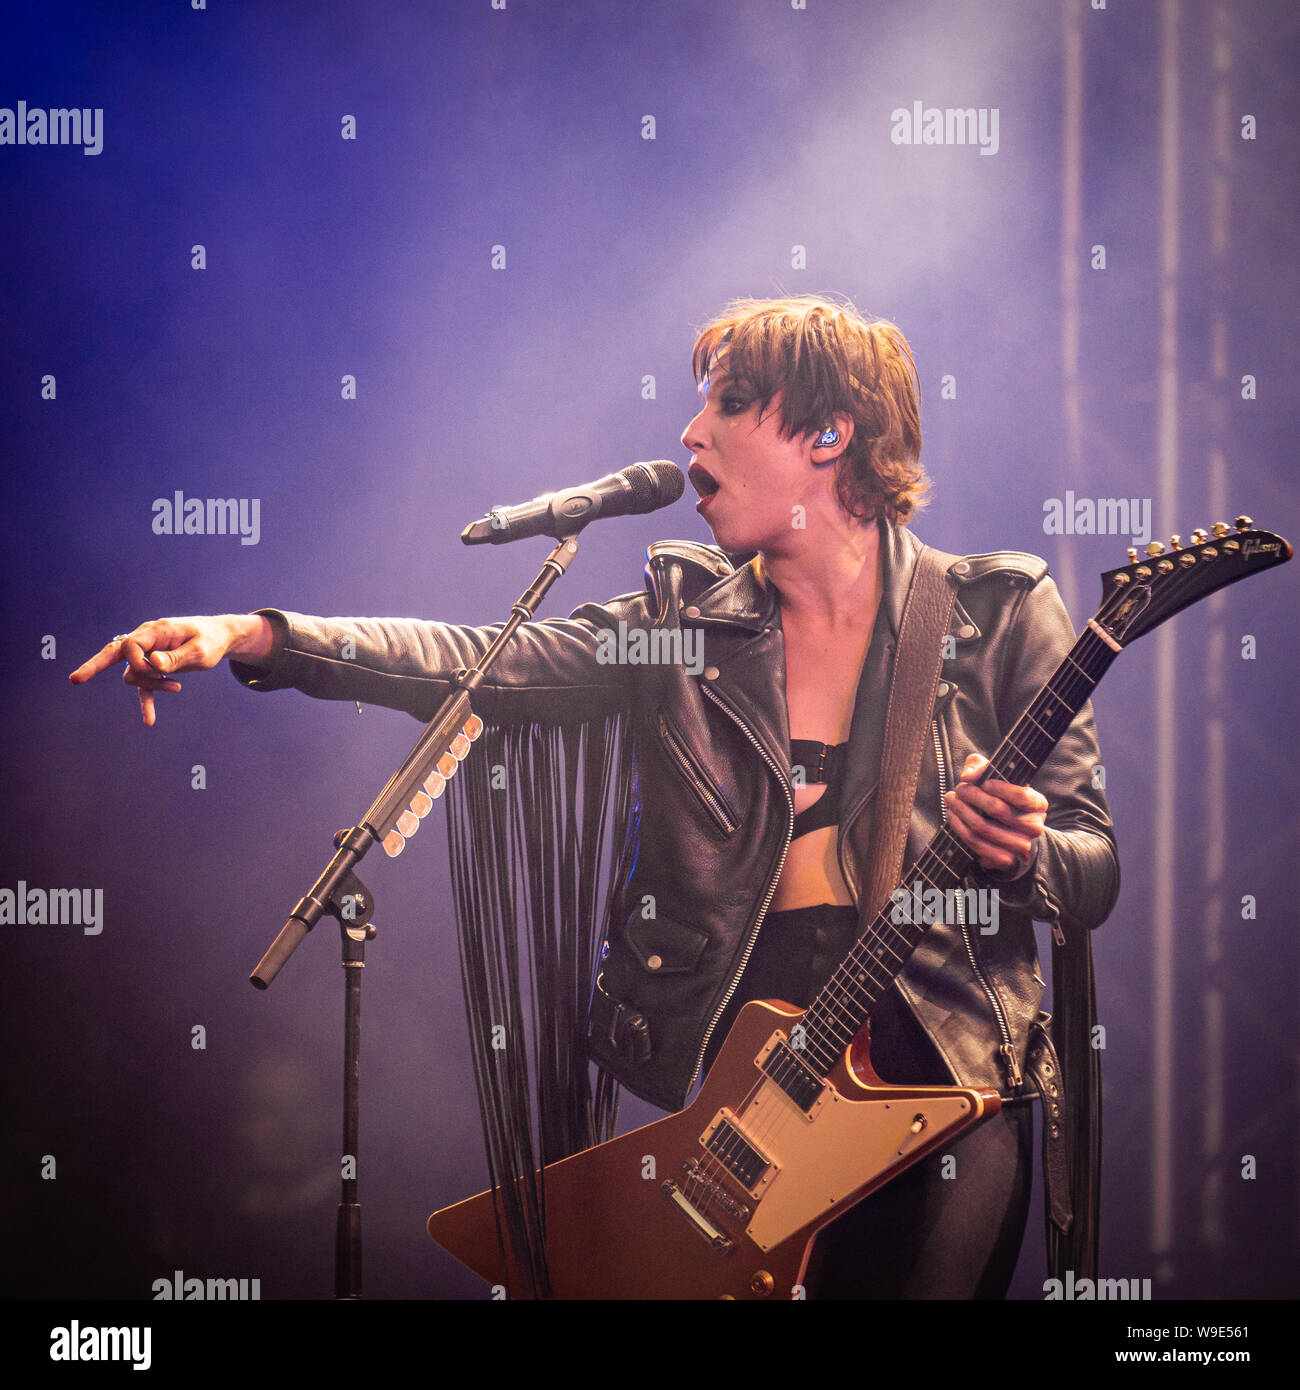 Halestorm performing on stage at the 2019 Copenhell Festival in Copenhagen. Here Lzzy Hale on vocals and guitar Stock Photo